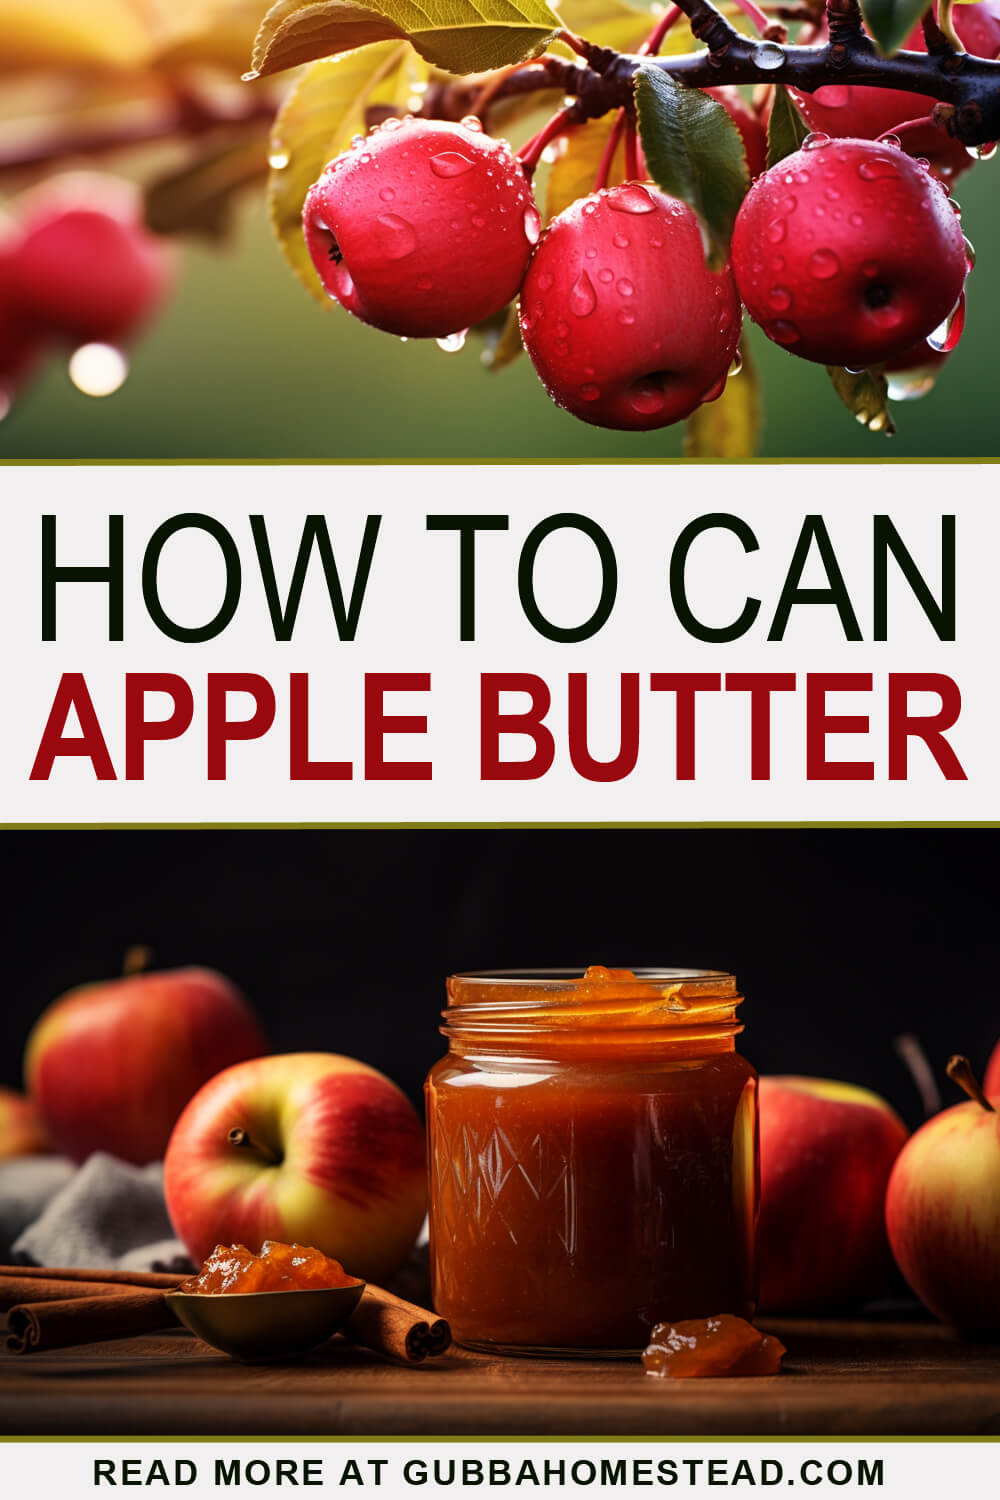 How To Can Apple Butter